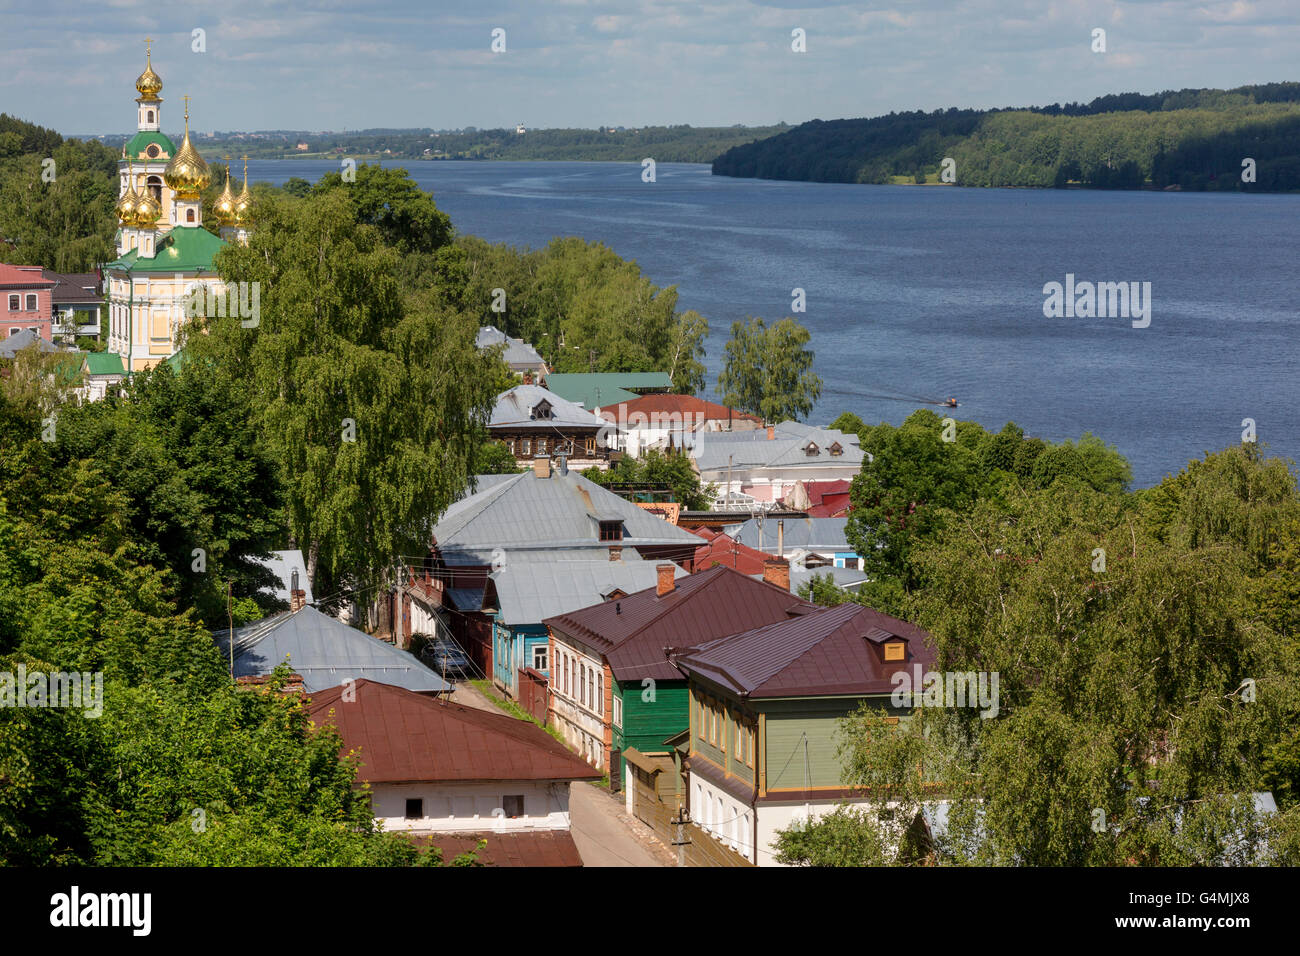 Aerial view of Russian town Ples on the Volga river in Russia Stock Photo